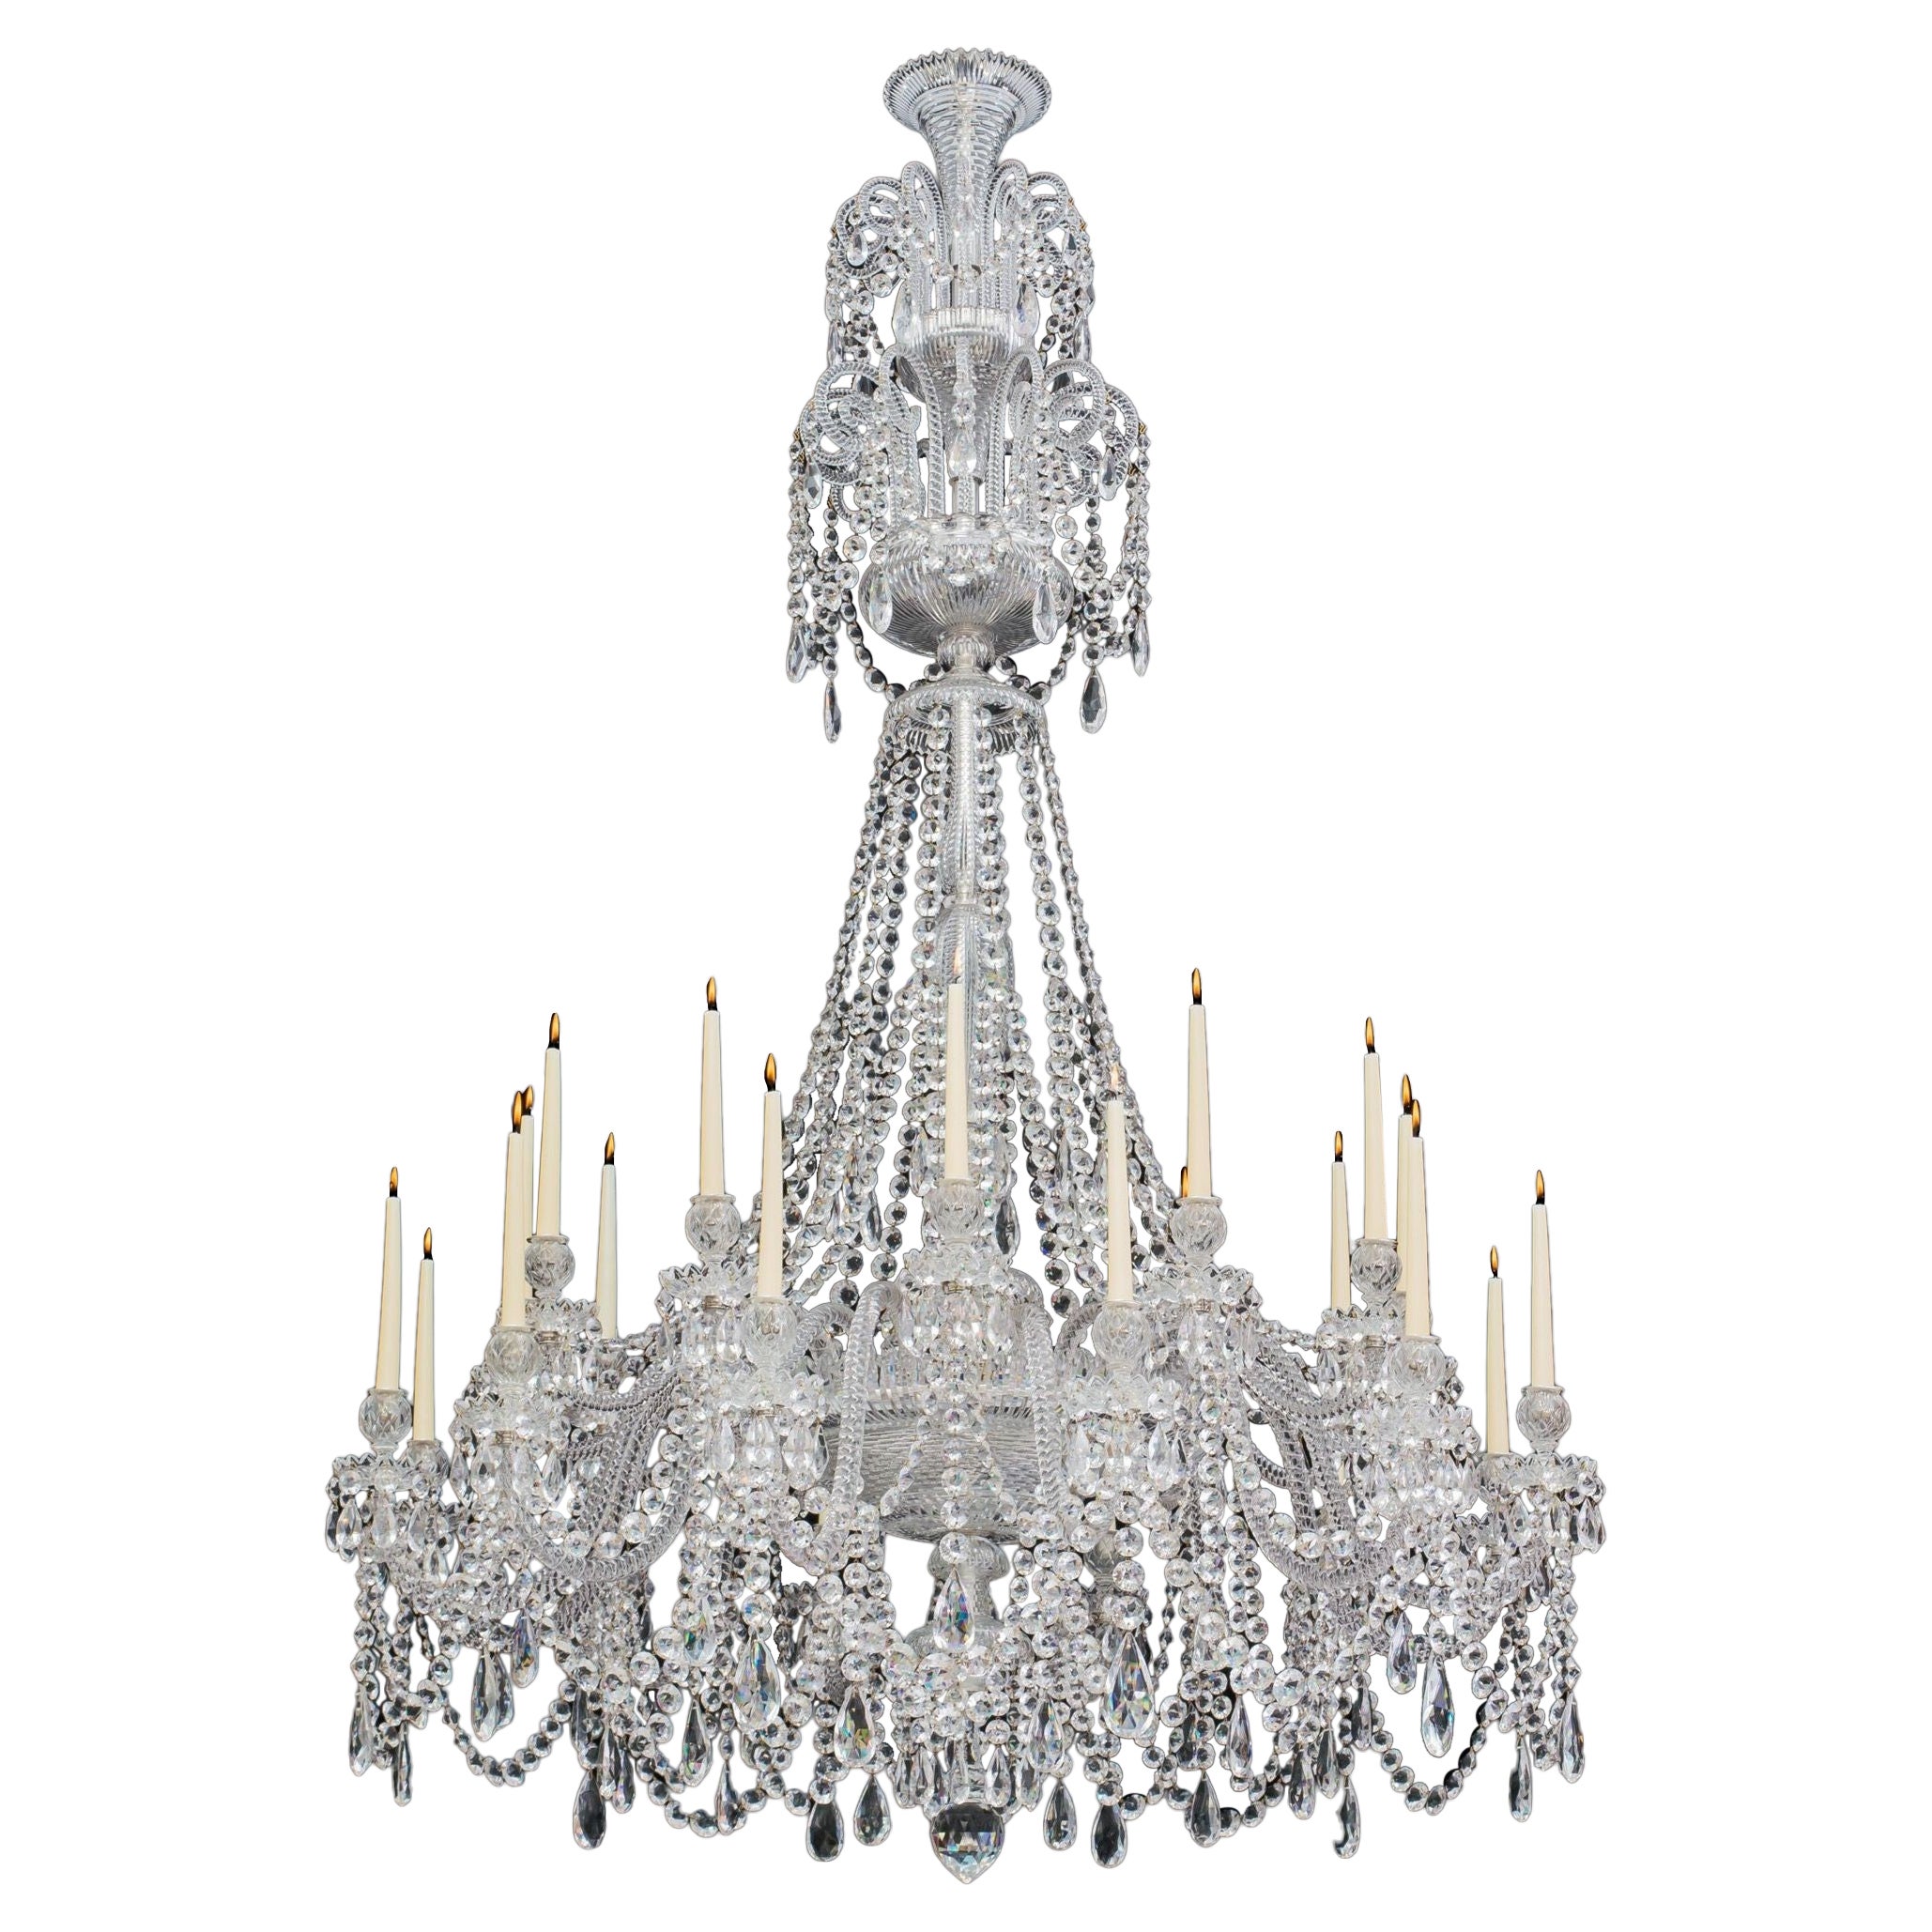 A Large Twenty Four Light Cut Glass Victorian Chandelier By Perry & Co London For Sale